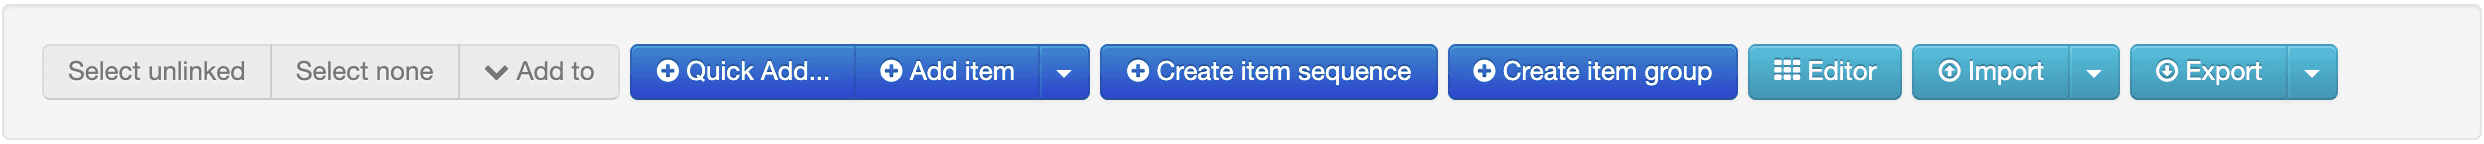 Export button in the items page of the Lightspeed back office